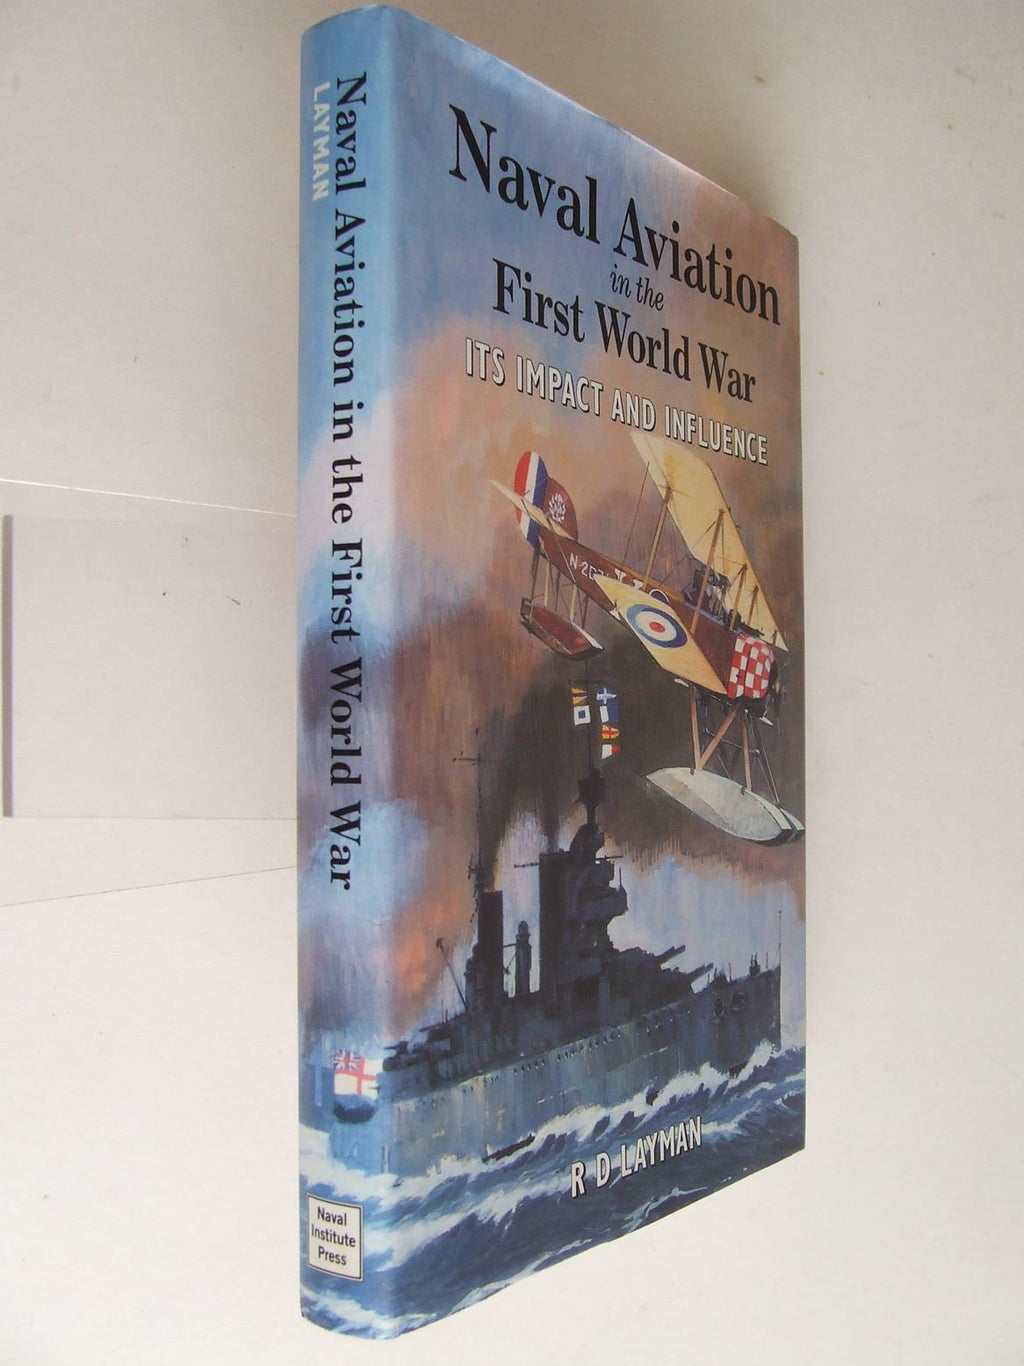 Naval Aviation in the First World War, its impact and influence